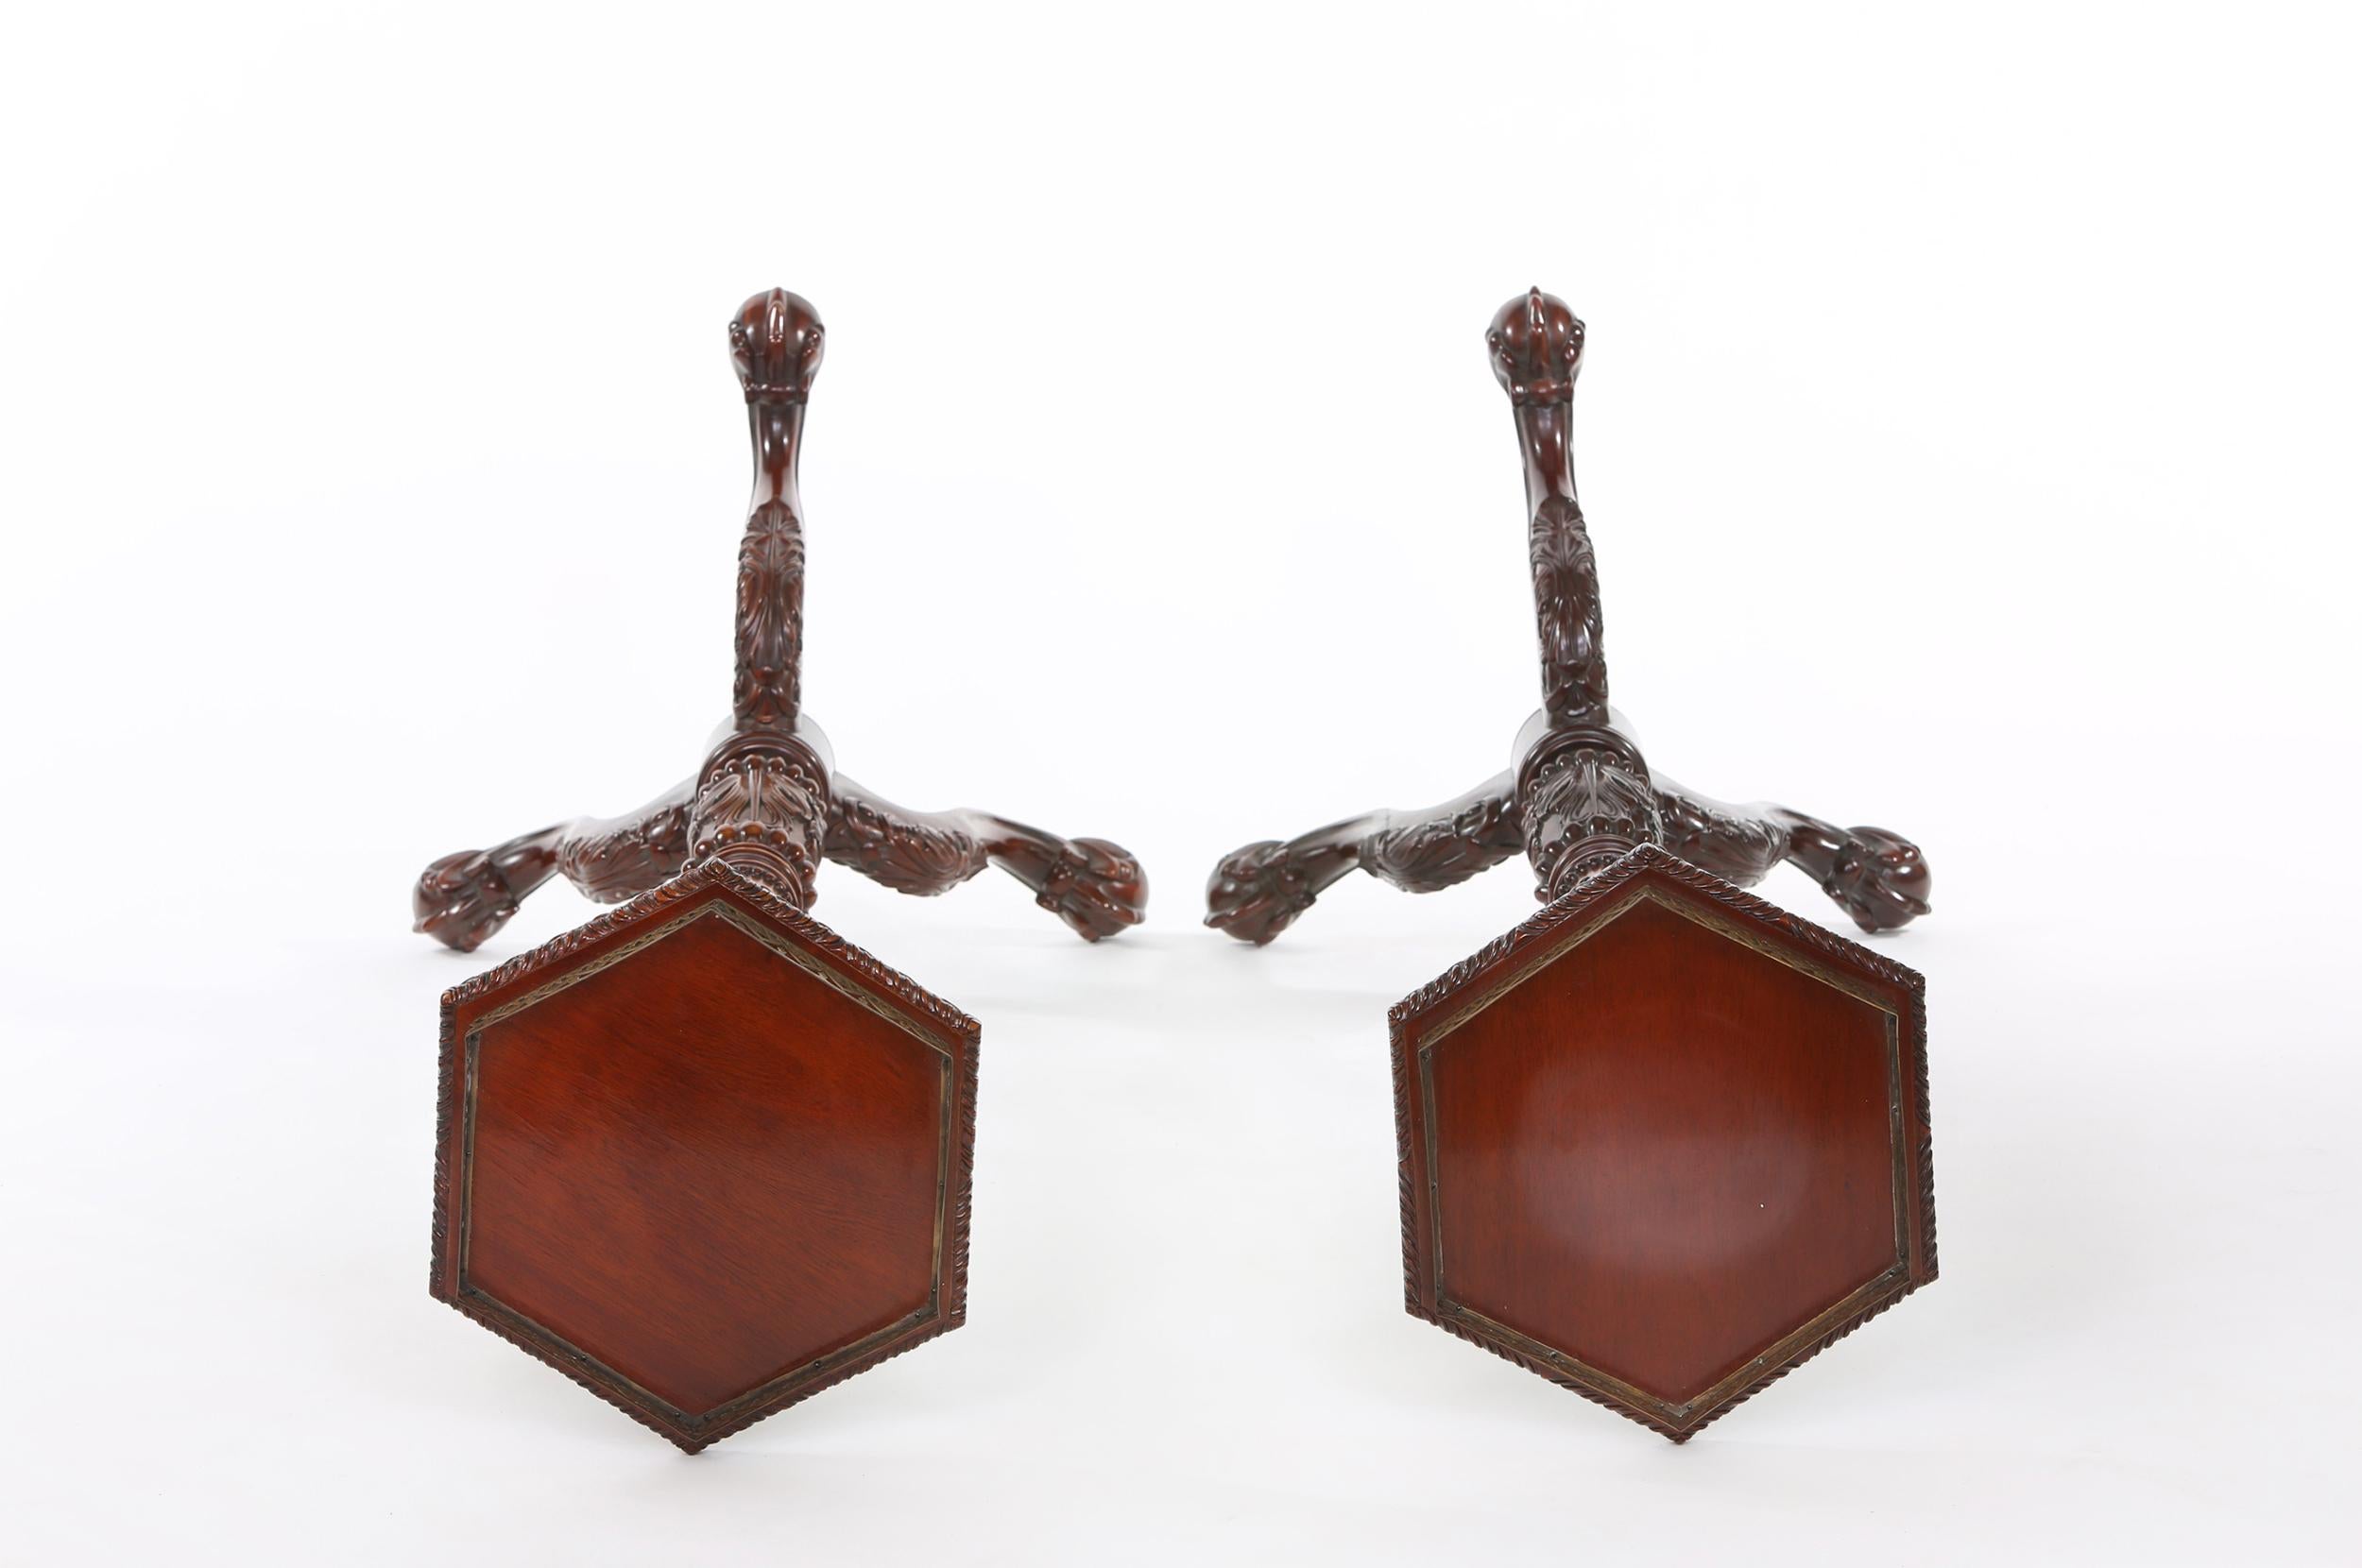 Pair of mahogany wood with brass gallery top tray pedestal tables. Each table is very sturdy and in good condition. Minor wear consistent with age / use. Each pedestal stands about 50 inches tall x 11.5 inches diameter.